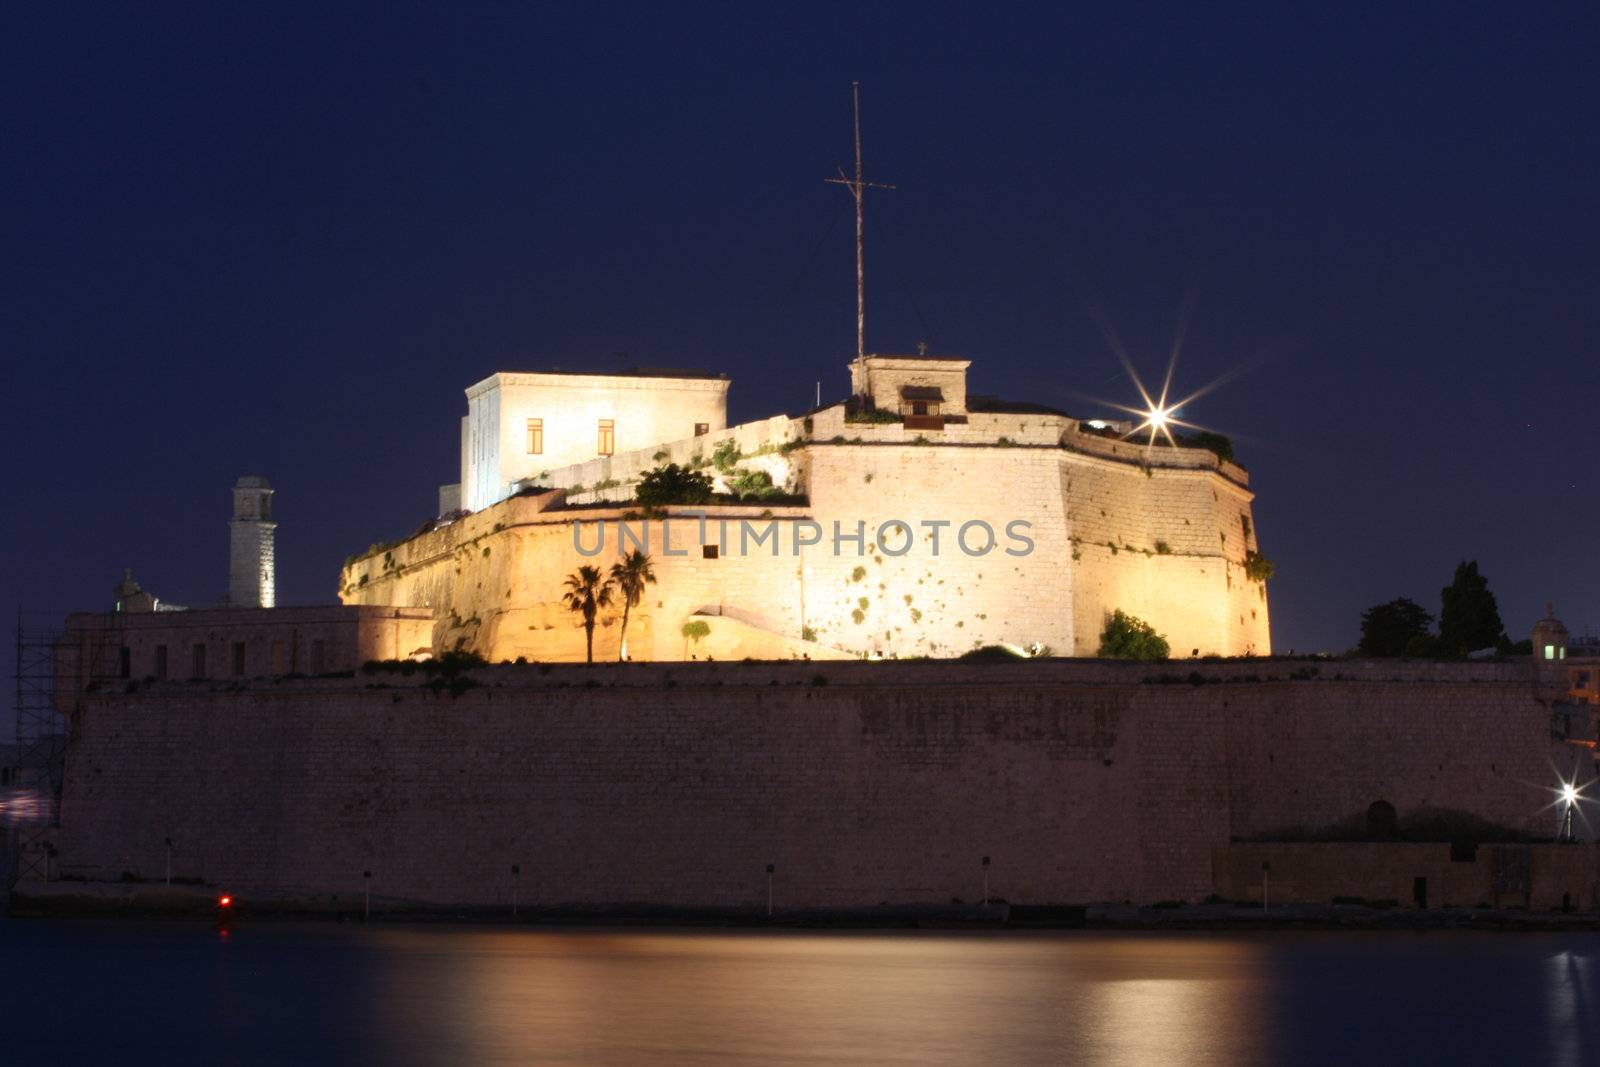 night time over the Grand harbor in Malta with Fort St. Angelo 